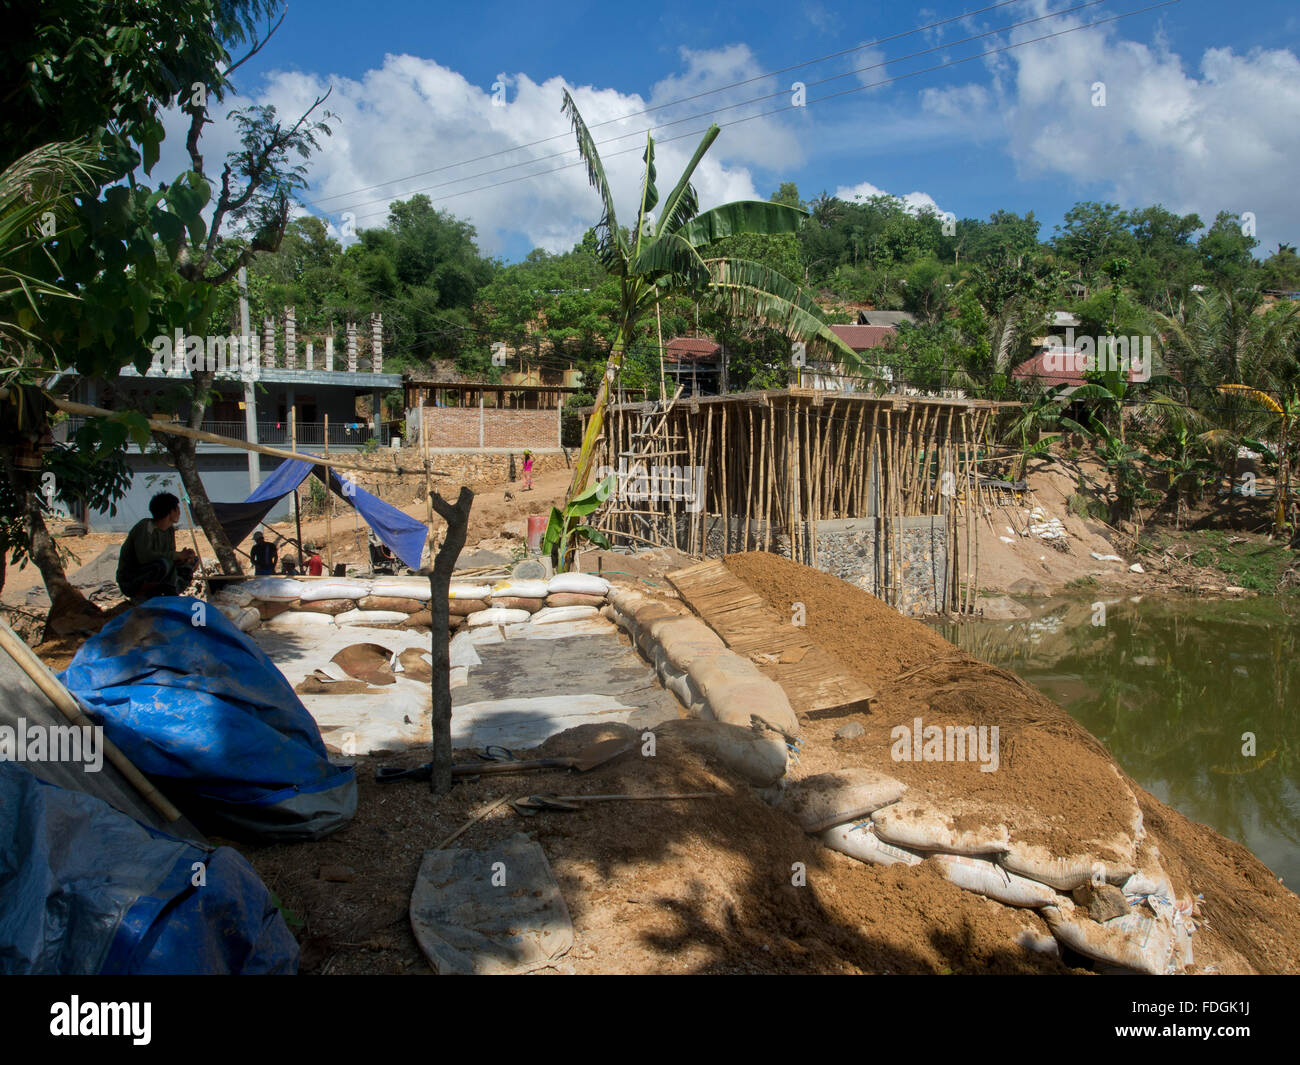 Local workers building hotel facilities in Lombok, Indonesia Stock Photo